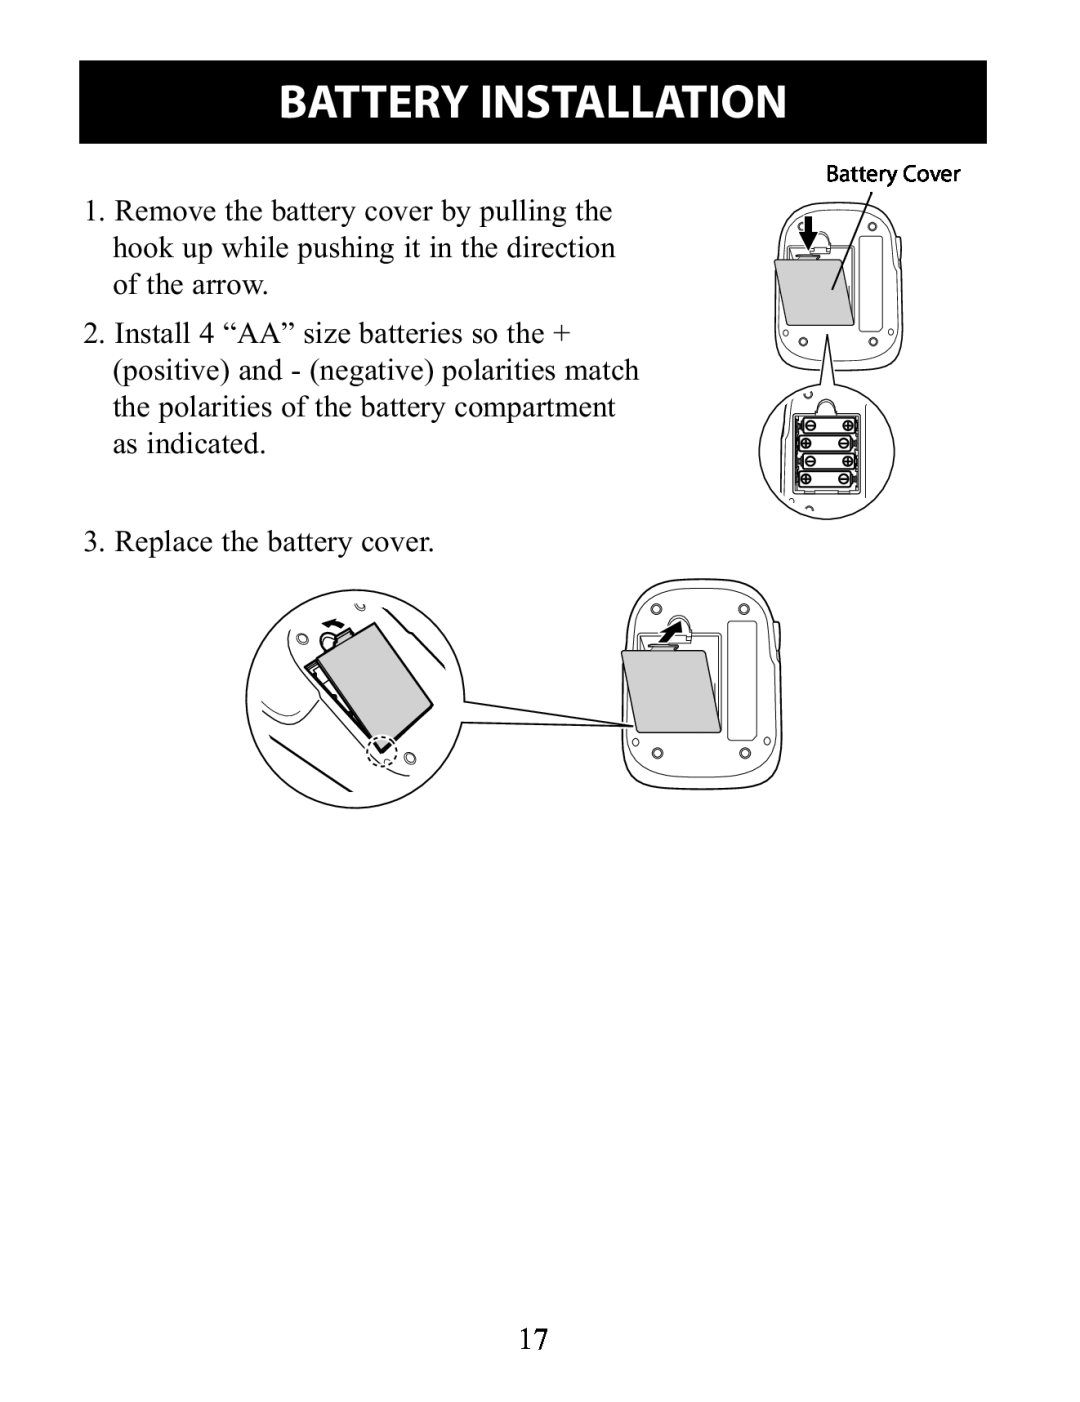 Omron Healthcare BP791IT instruction manual Battery Installation 